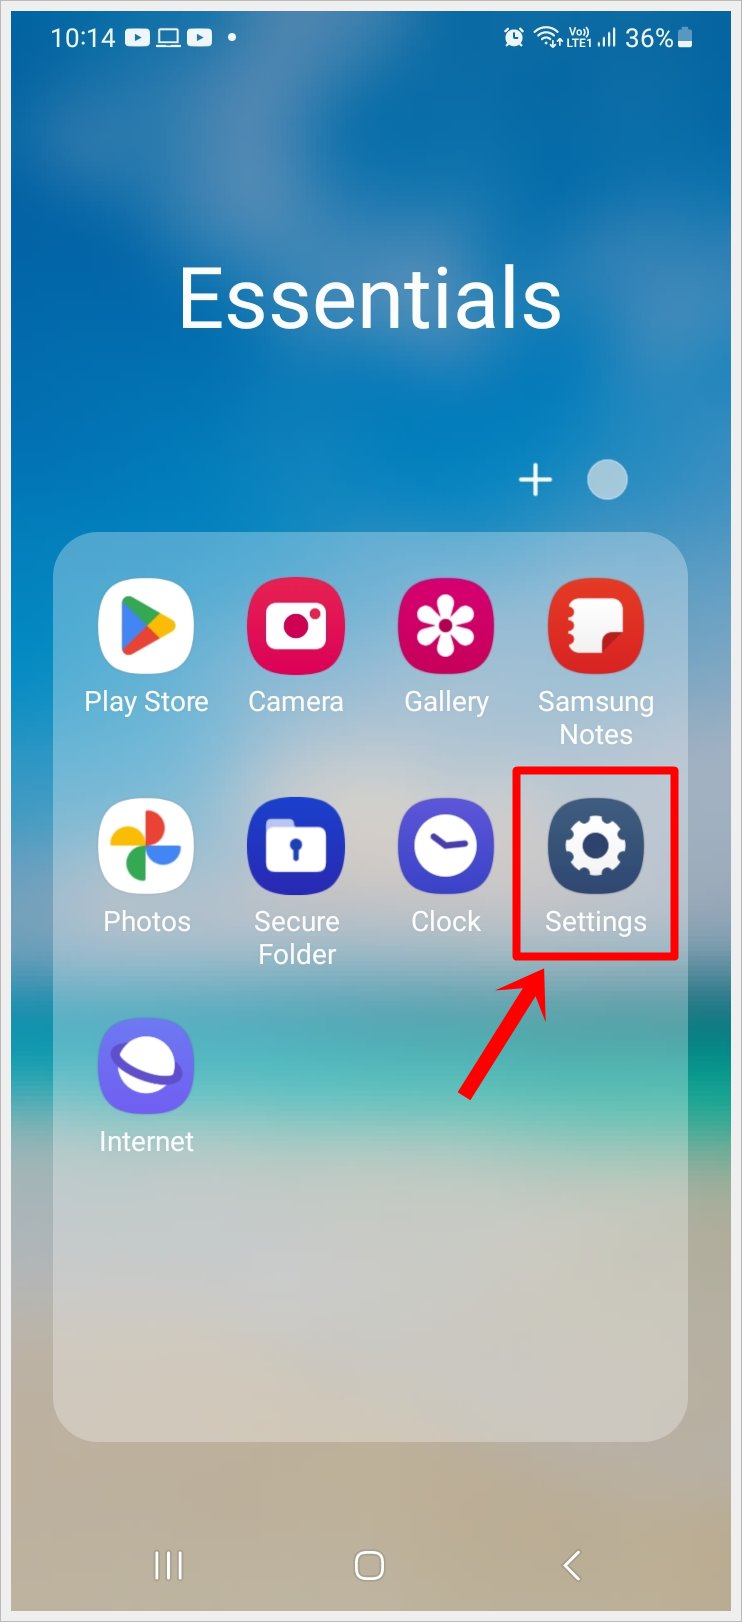 This image shows a screenshot of a Samsung Galaxy phone with the 'Settings' icon highlighted.